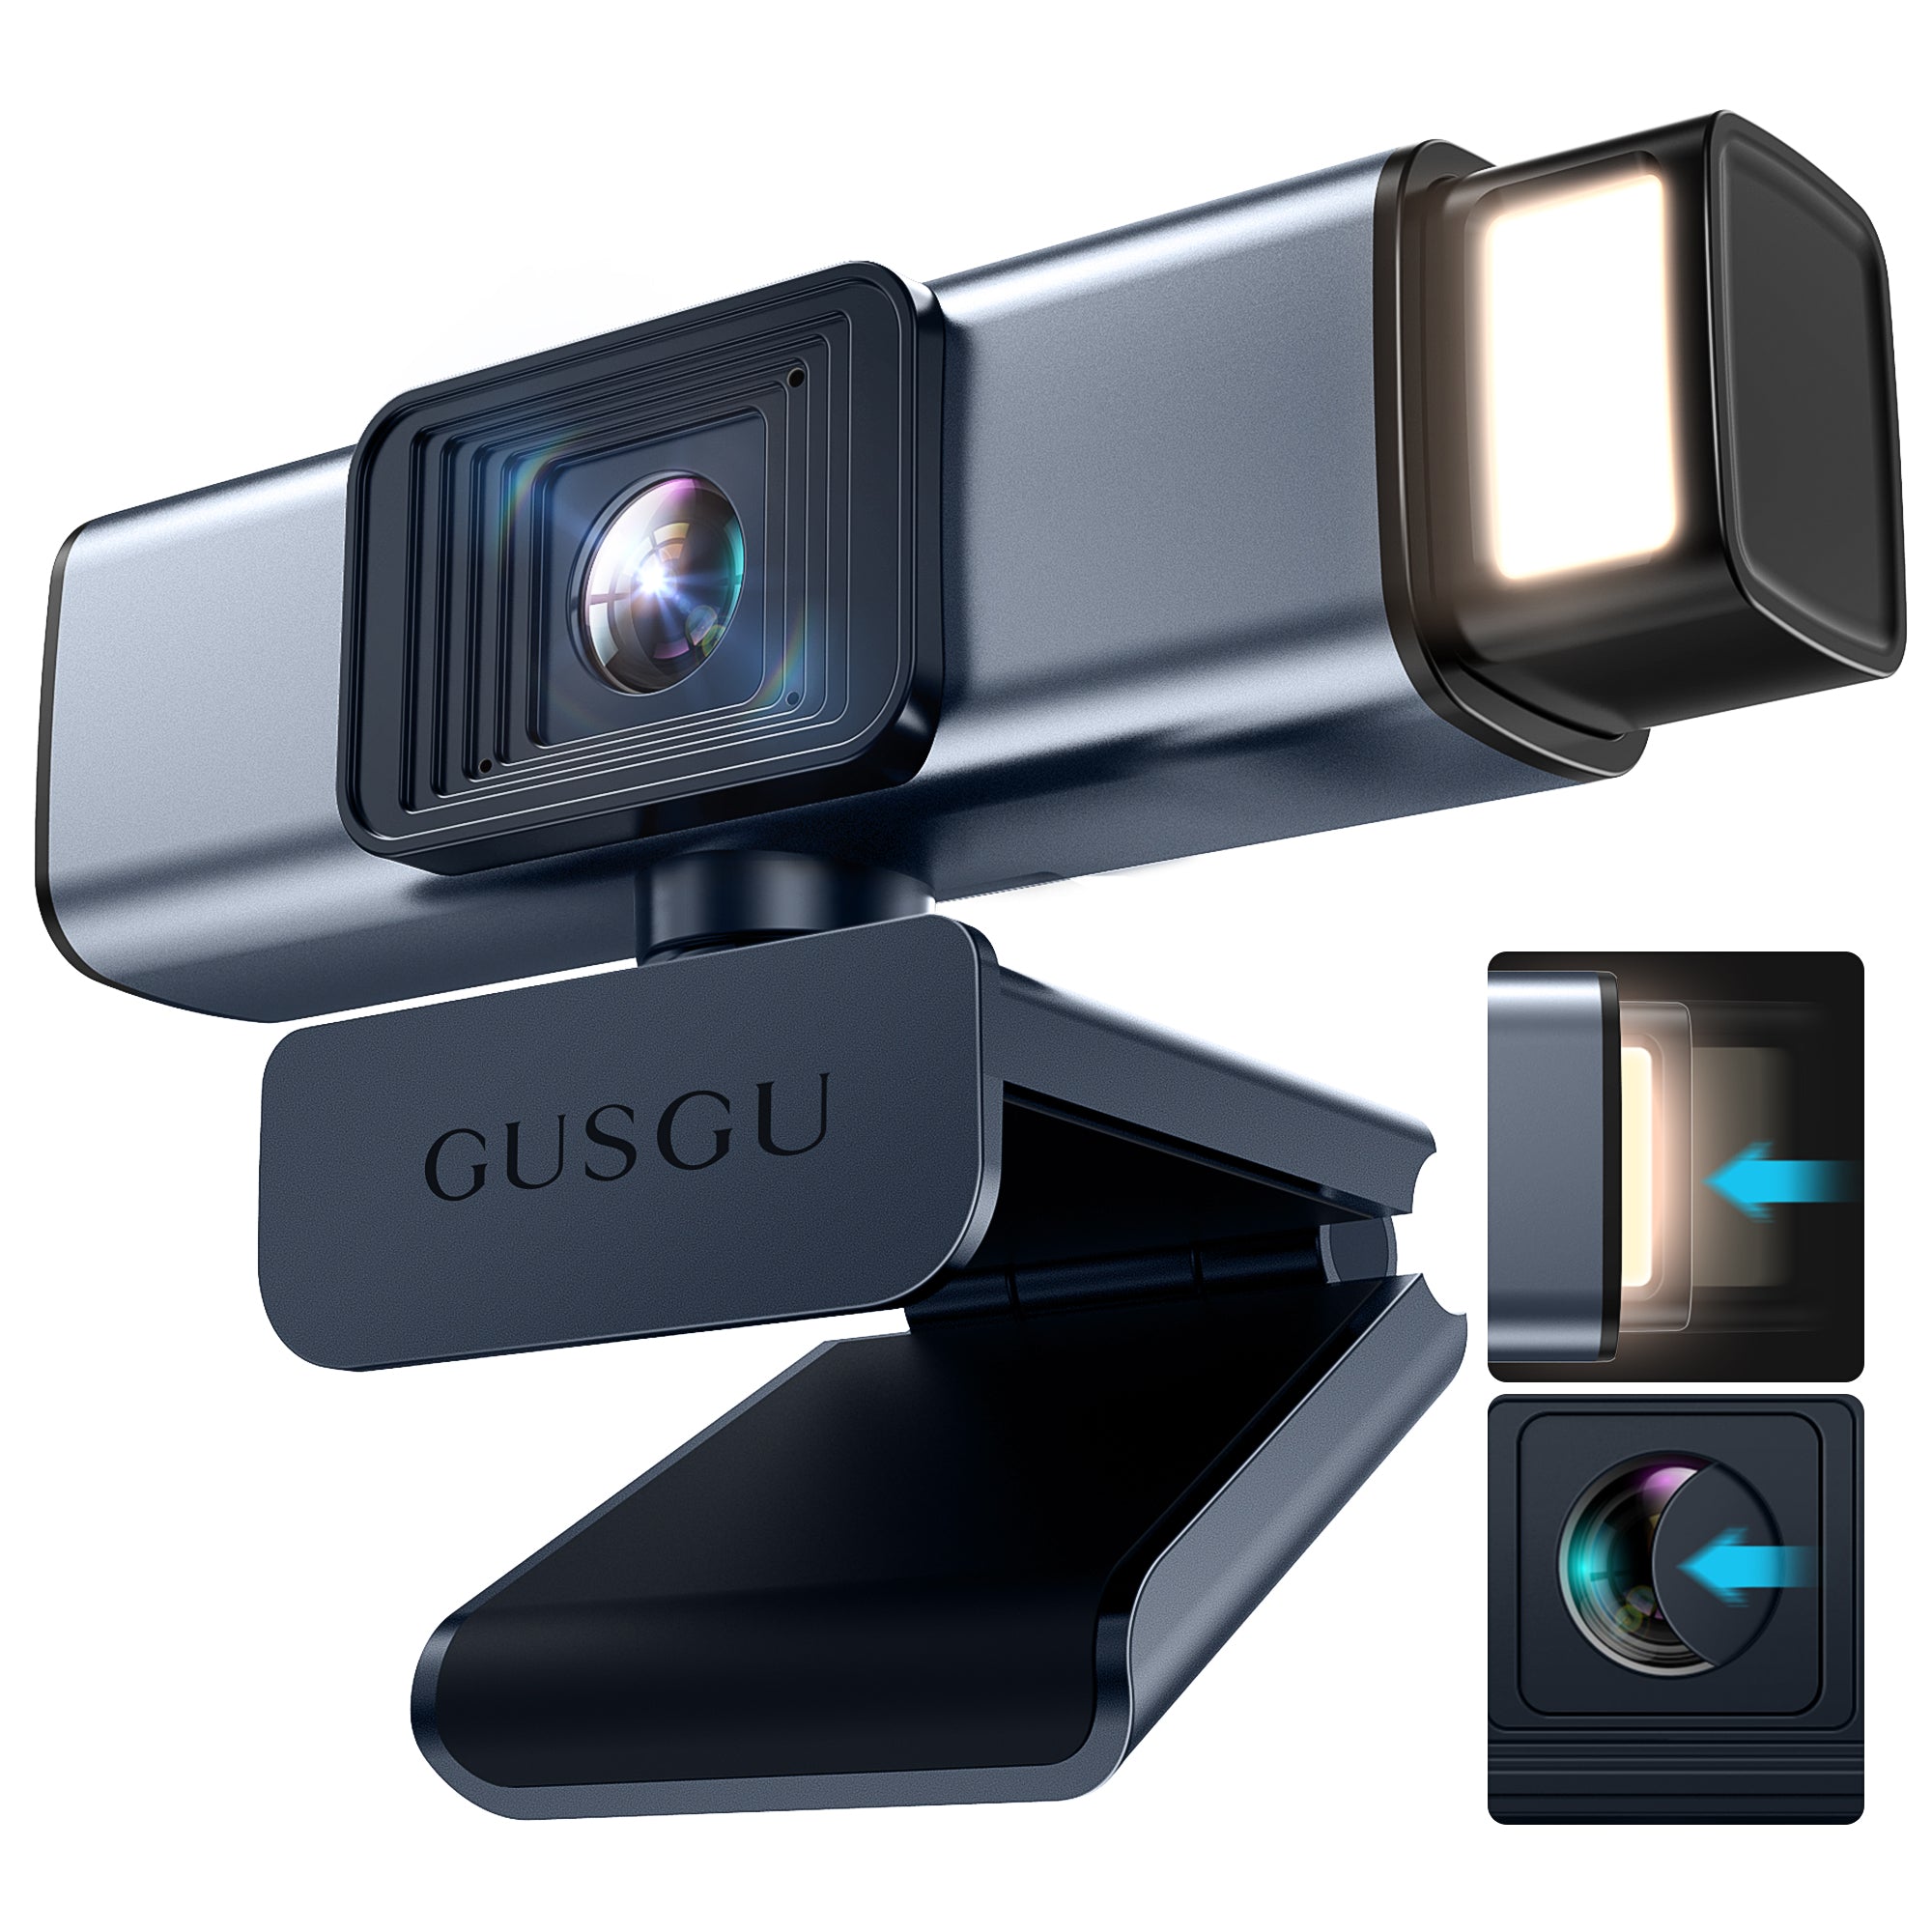 GUSGU Radiant G940 QHD 2K Webcam with Microphone and Privacy Protection